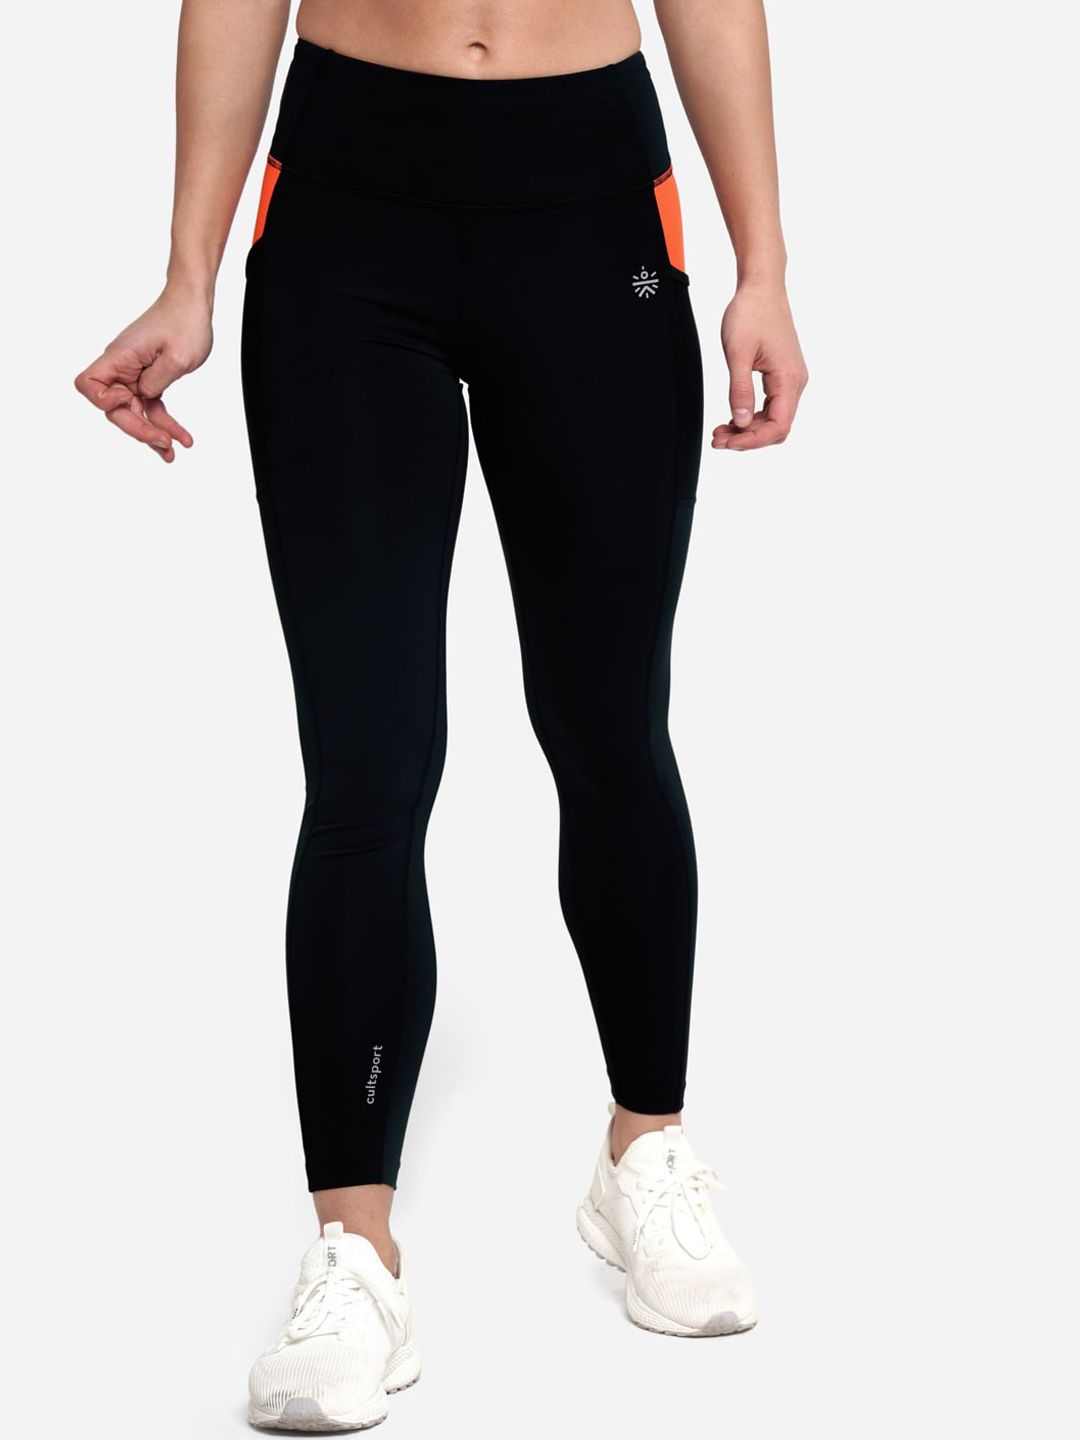 Cultsport Women Black & Orange Antimicrobial Fly Dry Absolute-Fit Tights Price in India